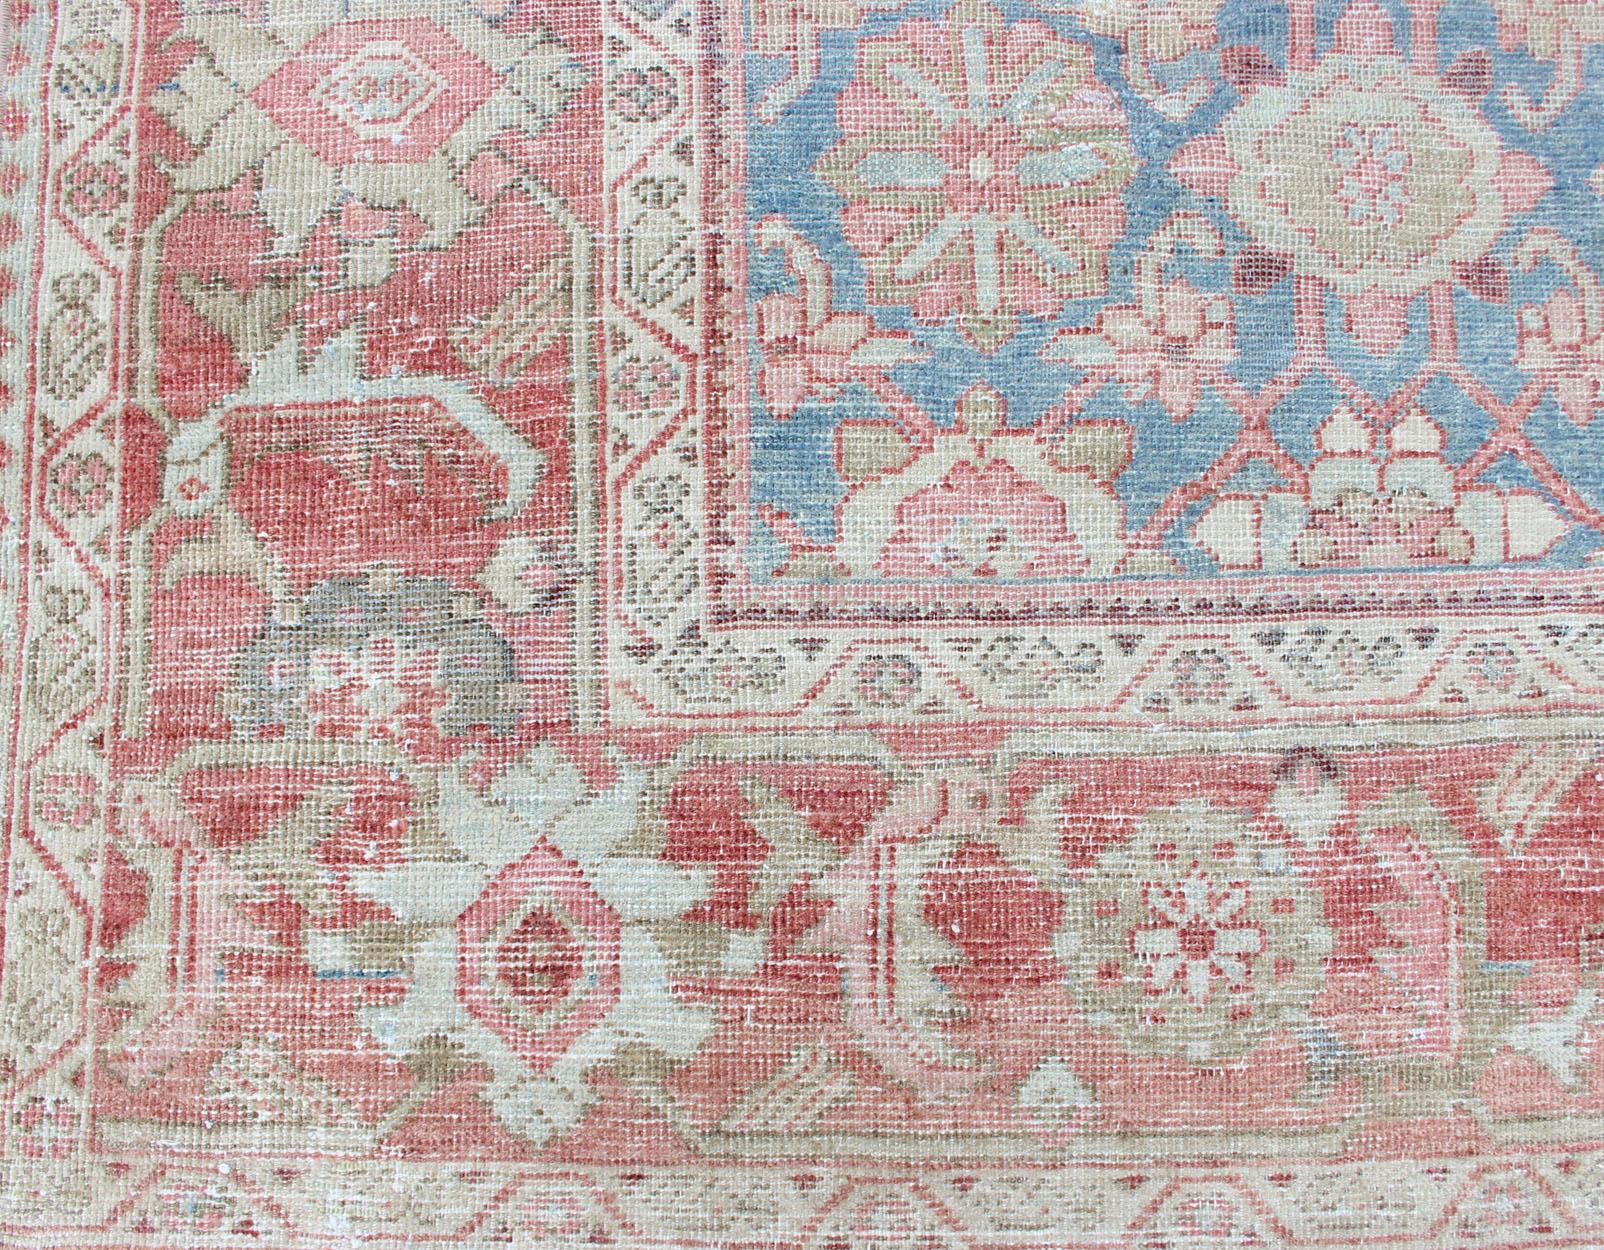 20th Century Gallery Antique Persian Mahal Rug with Light Blue Background and Faded Red